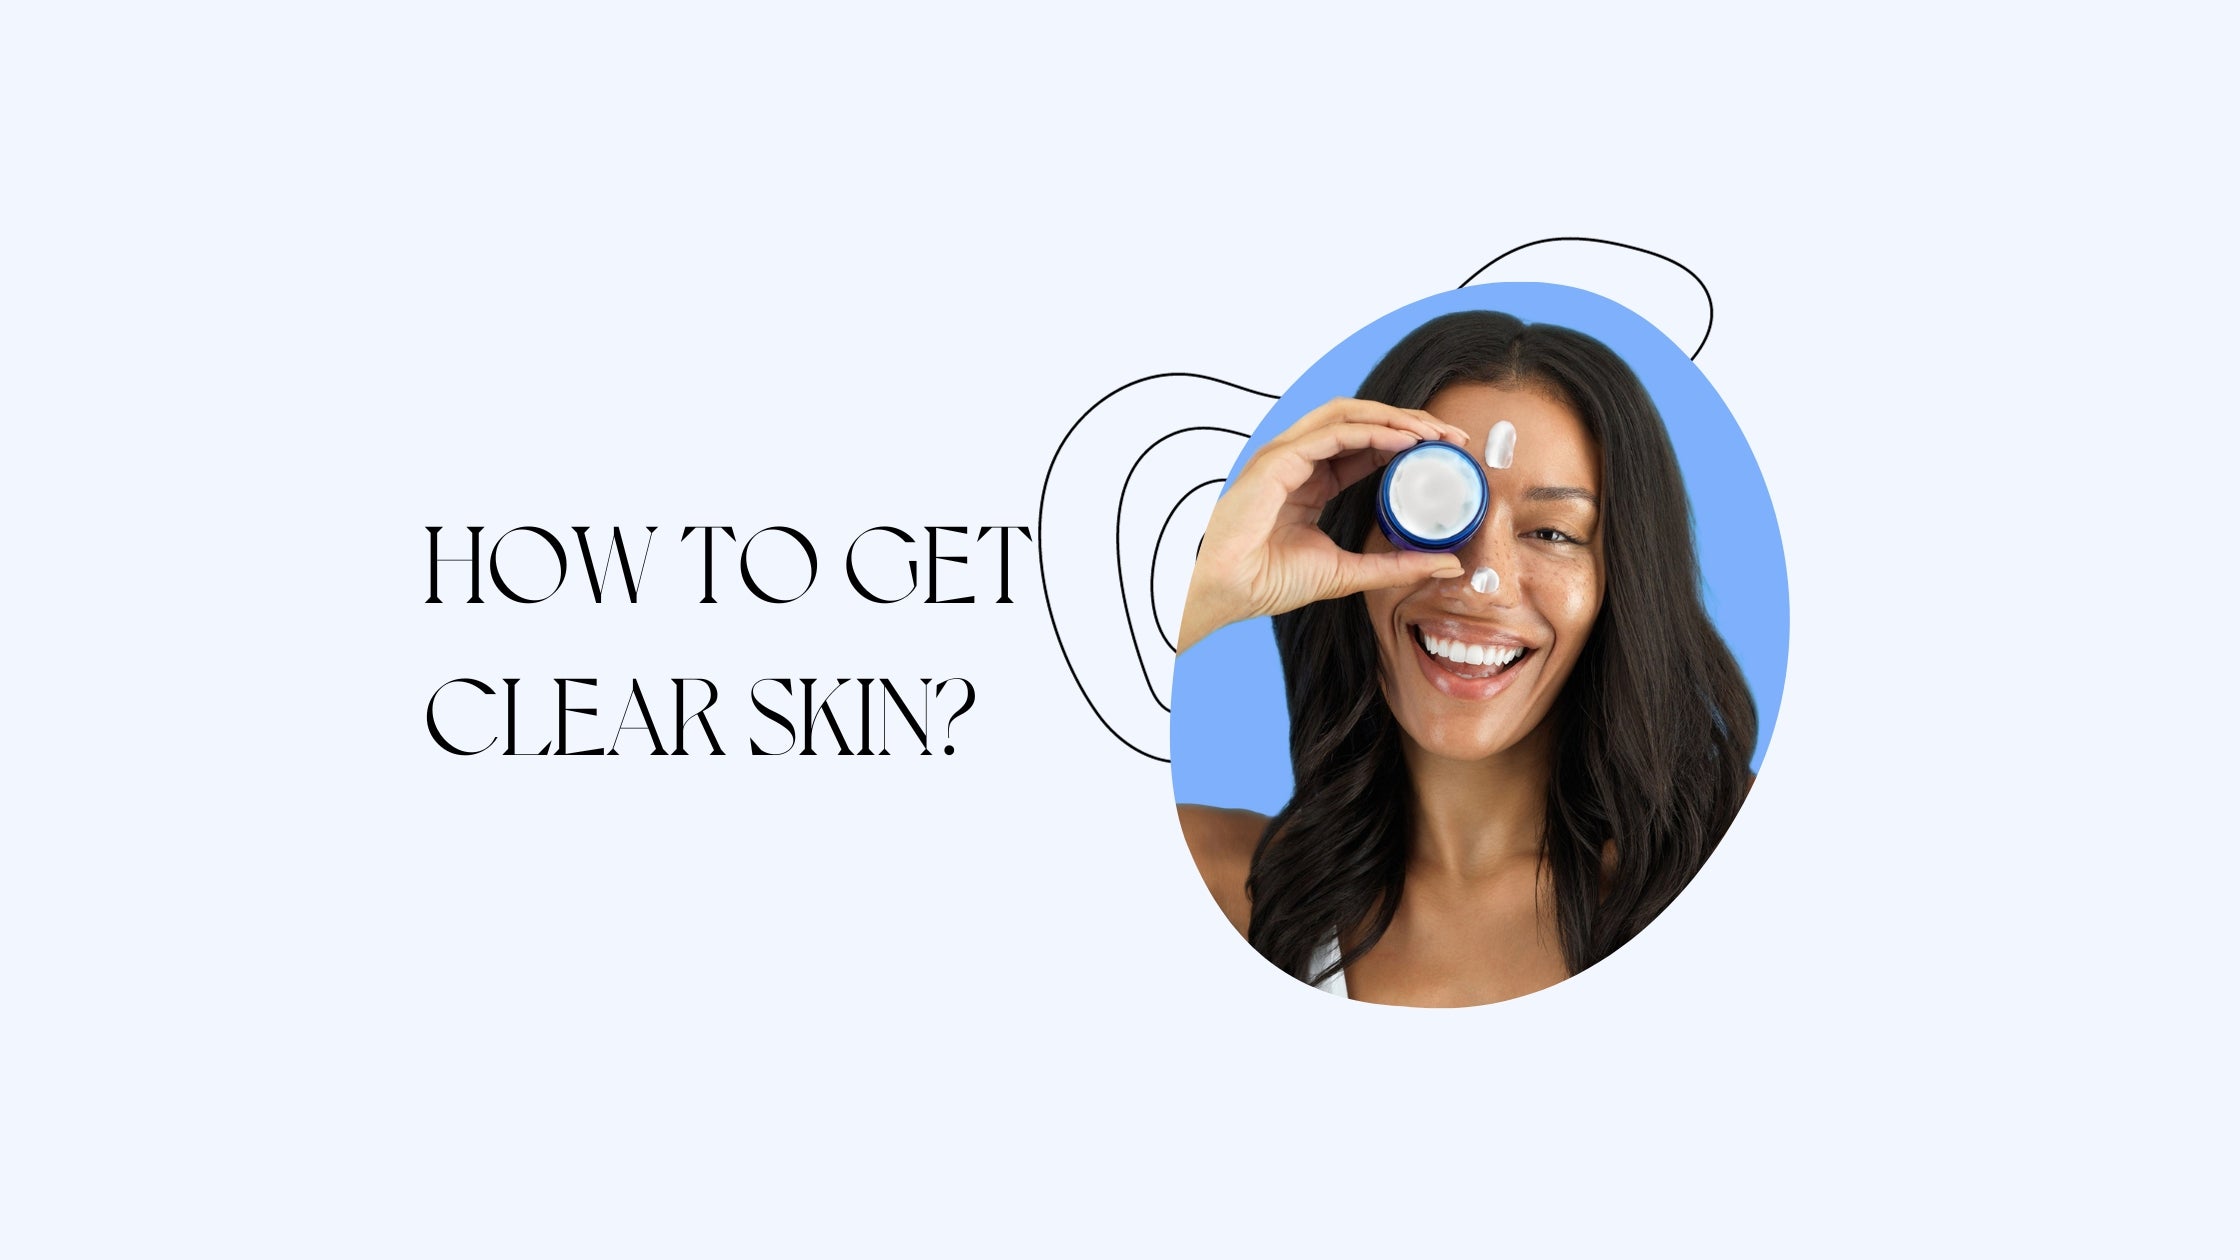 How to Get Clearer Skin?